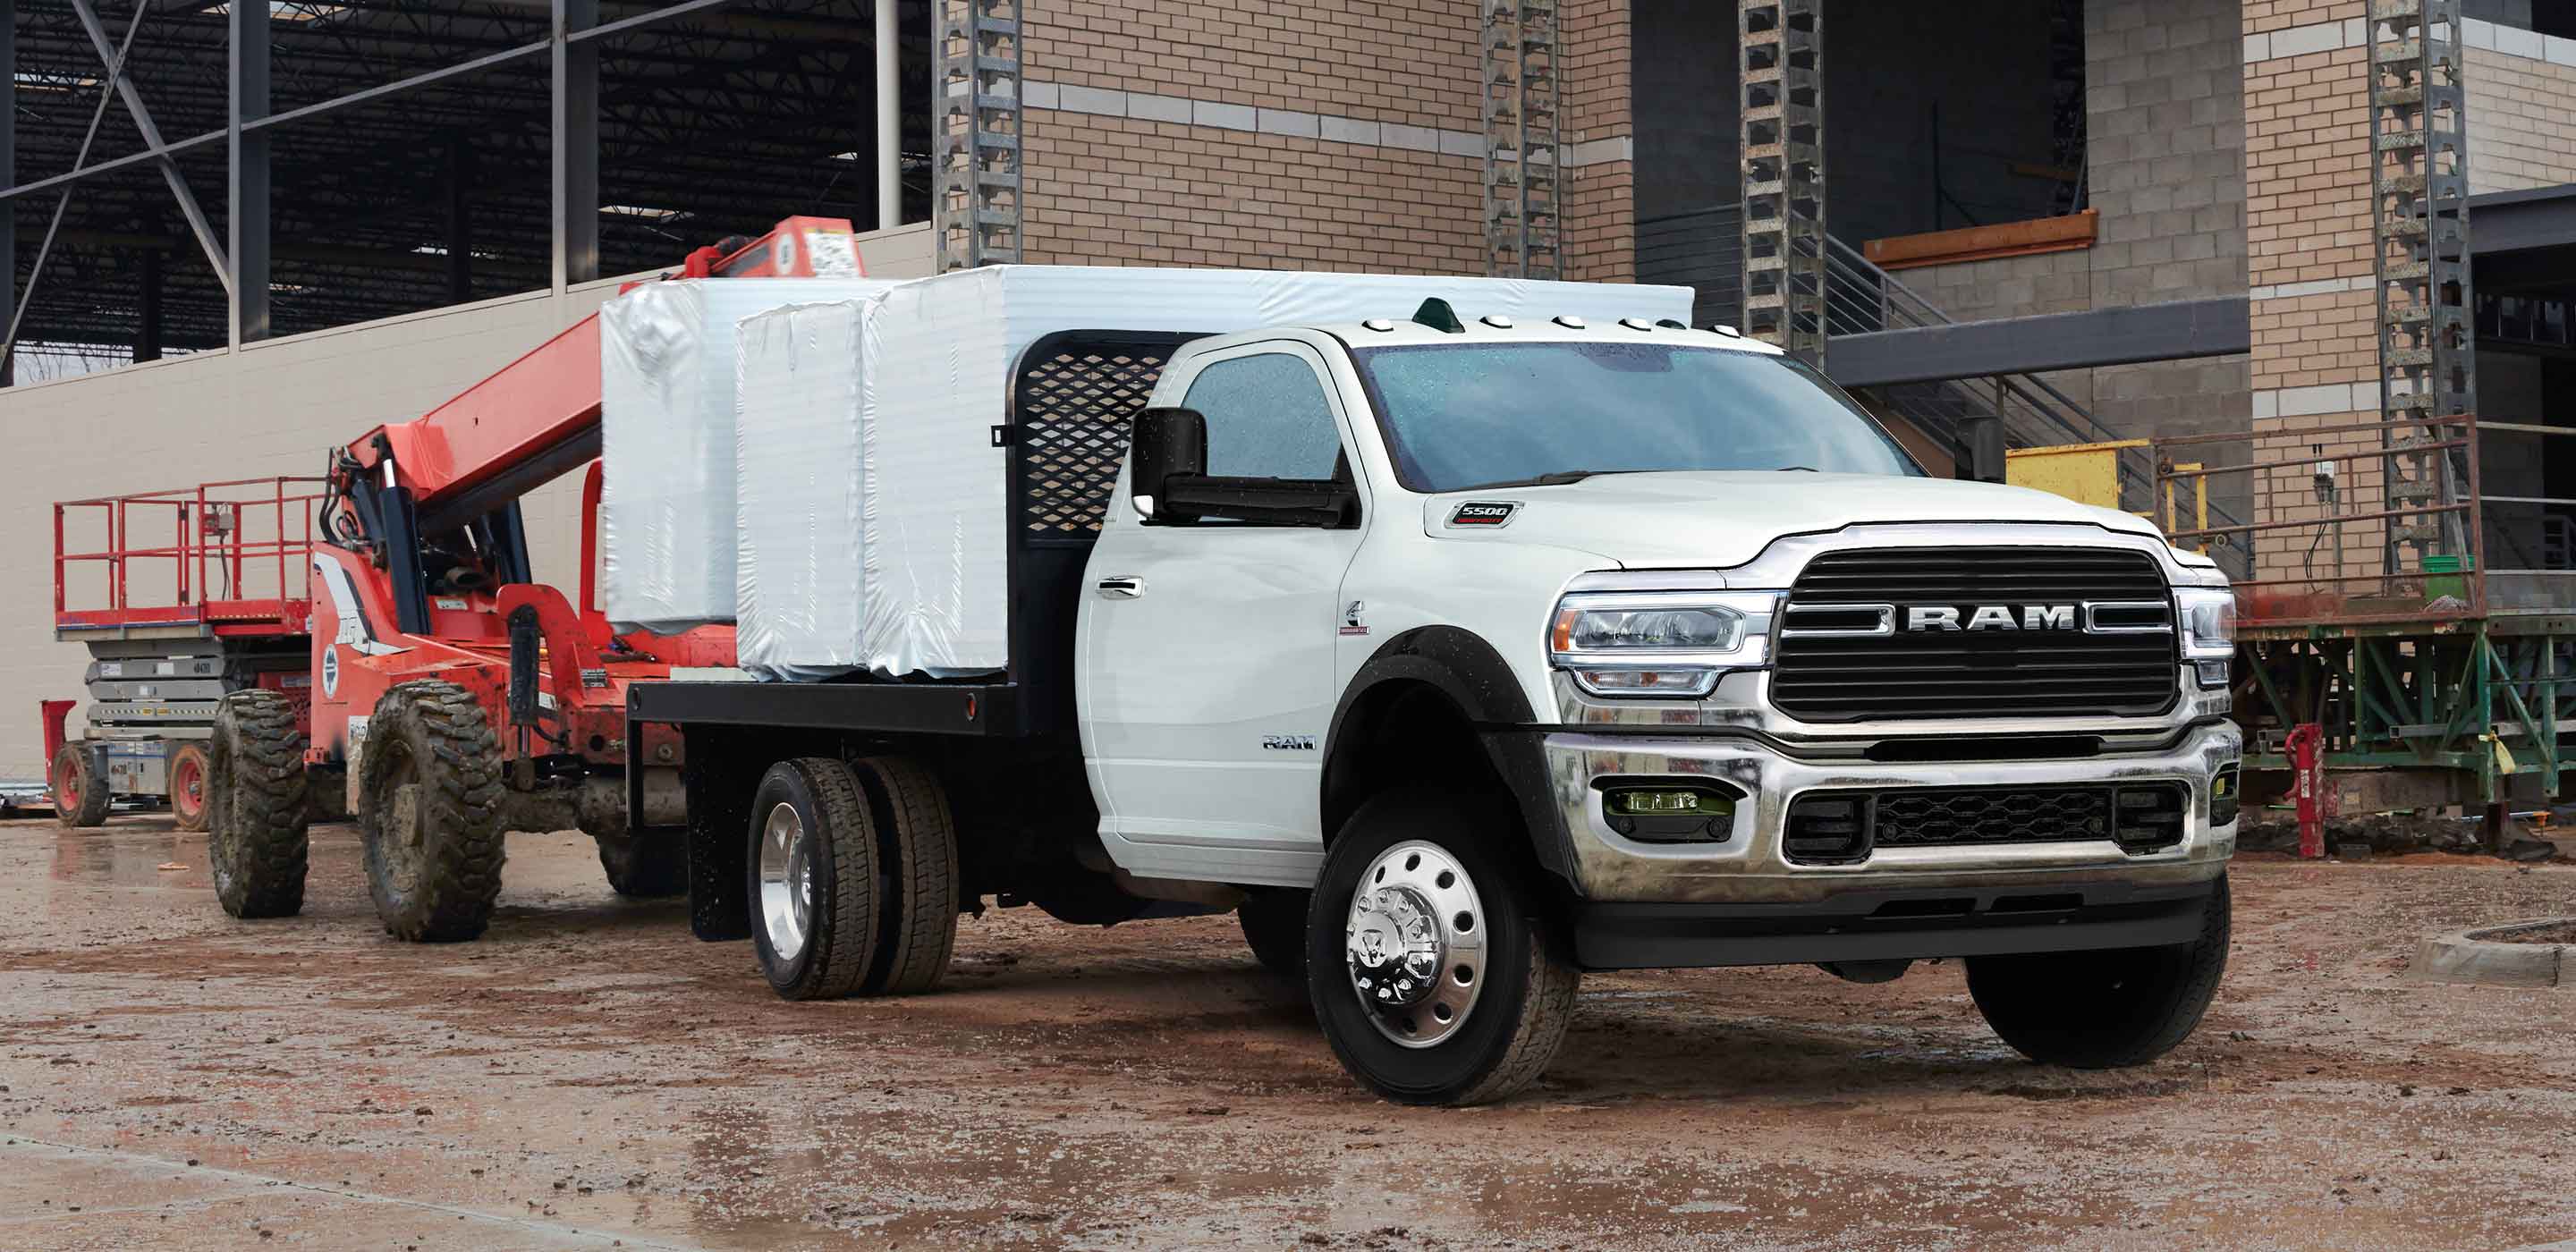 Display The 2022 Ram Chassis Cab on a construction site, with a boom lift loading tightly wrapped pallets onto the truck's flatbed.